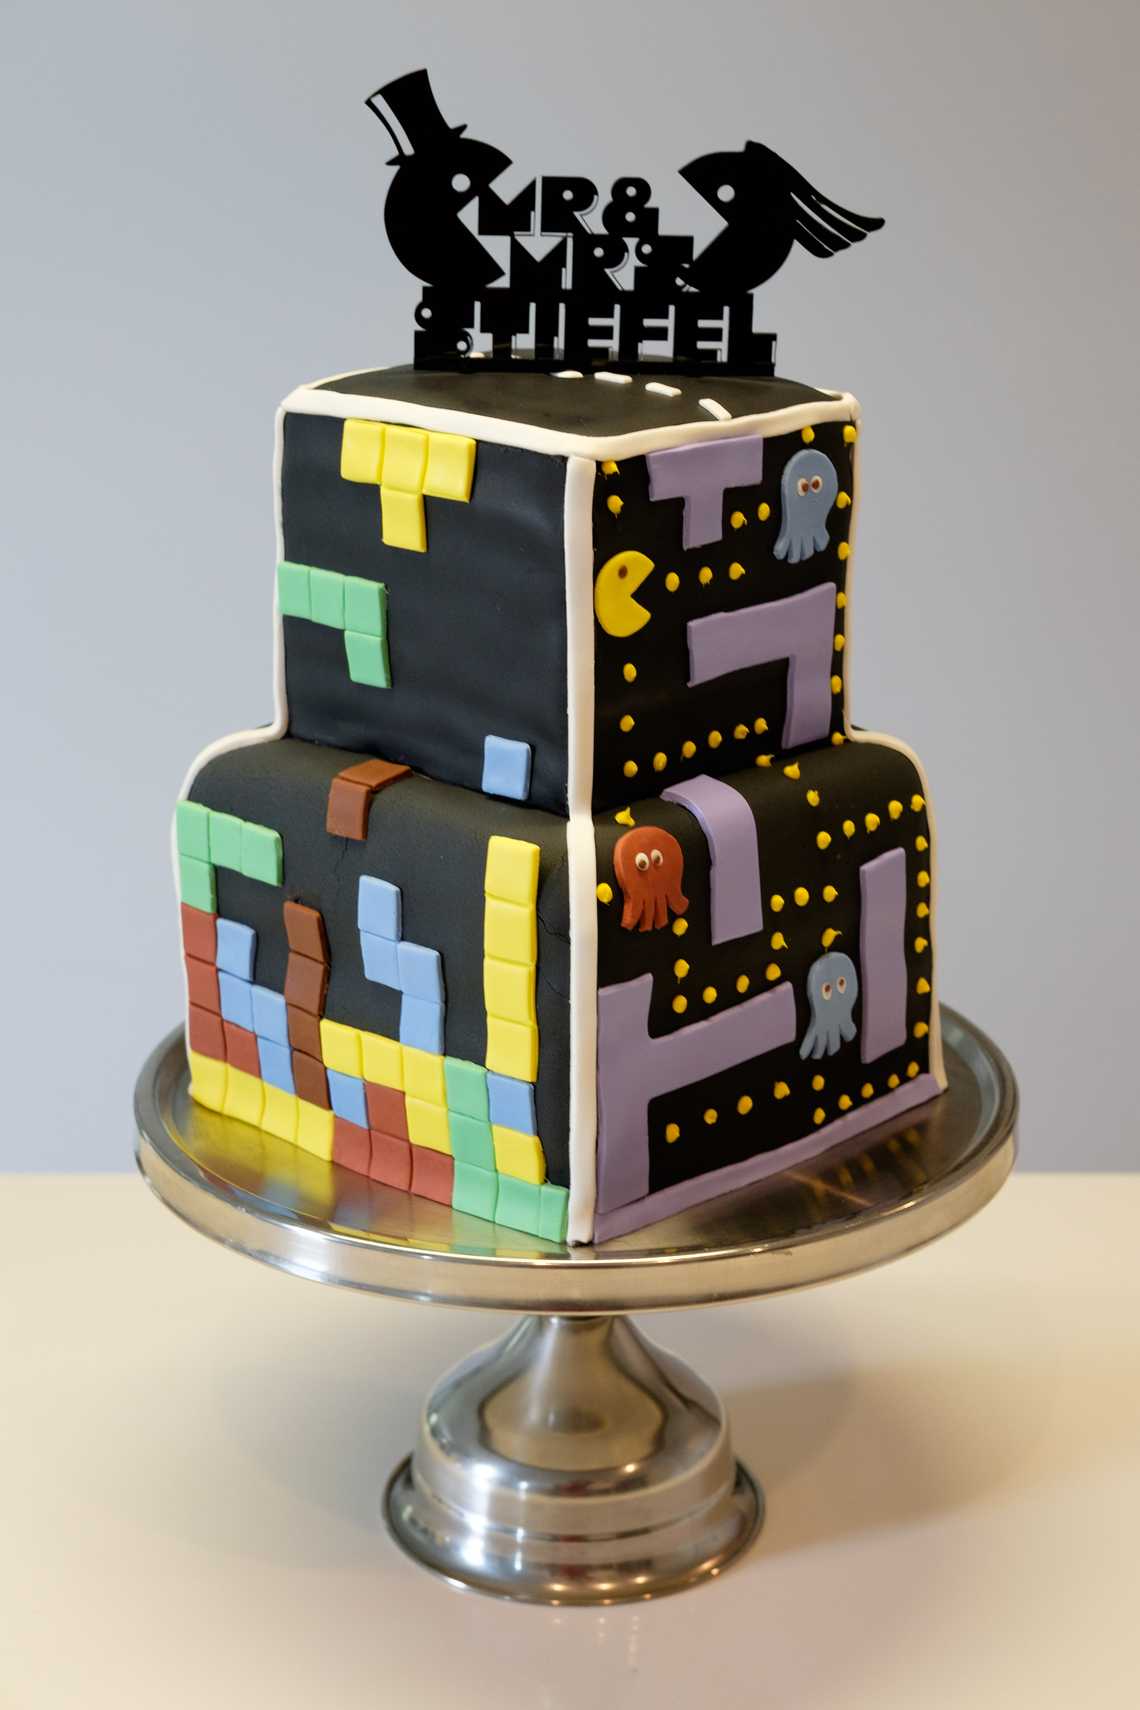 Classic Games Cake — May 22, 2016